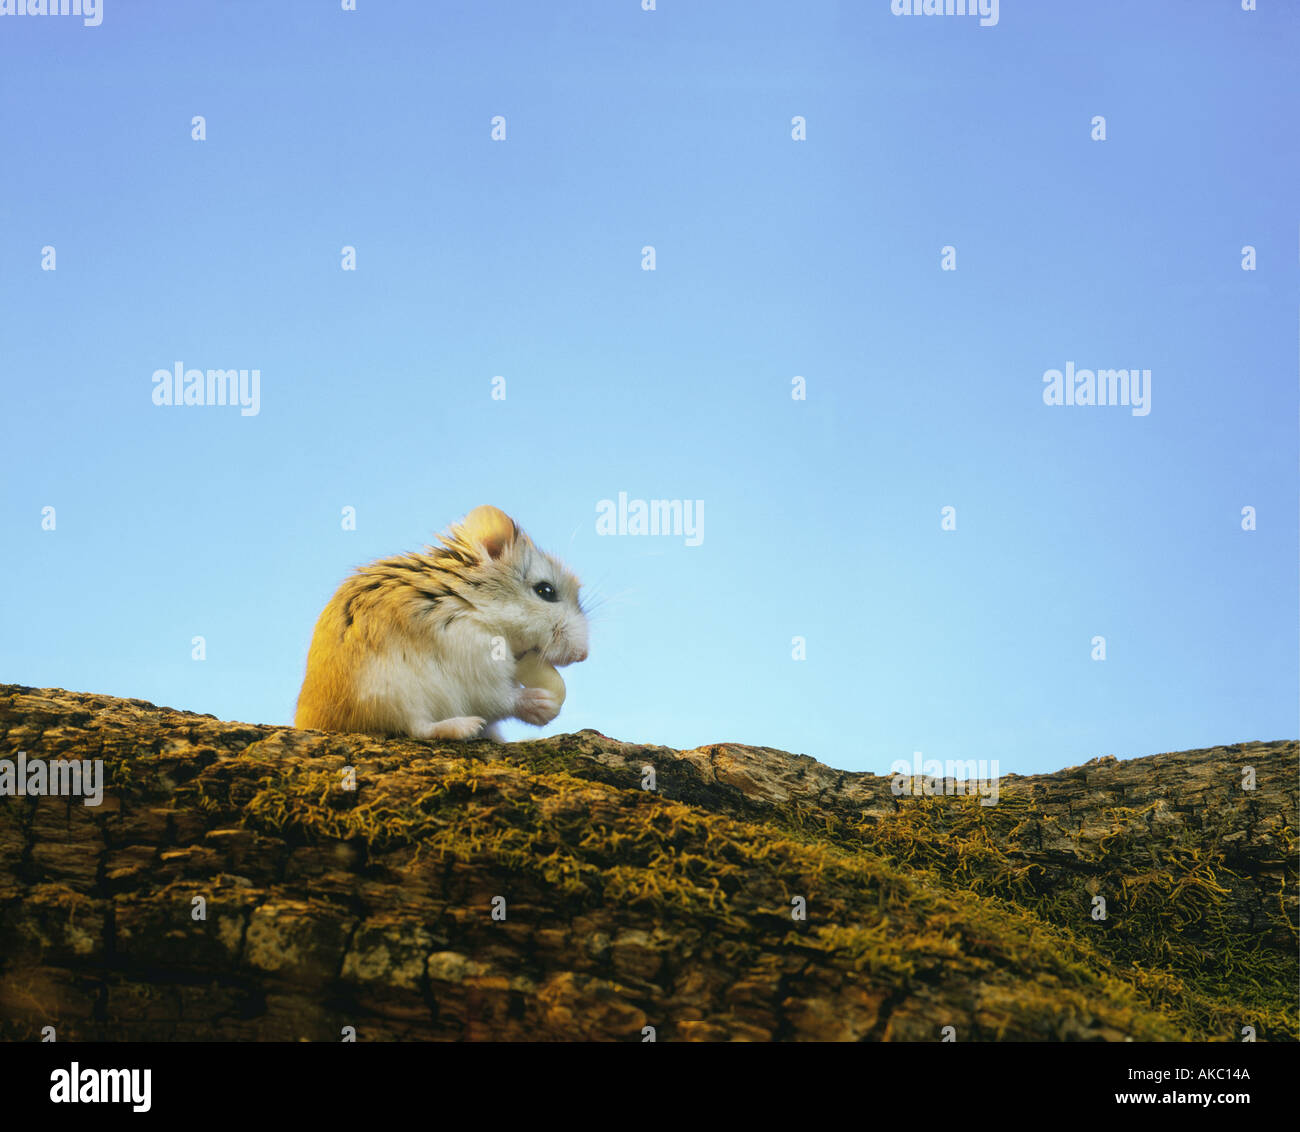 Roborowsky Hamster sitting and looking and eating a peanut Stock Photo